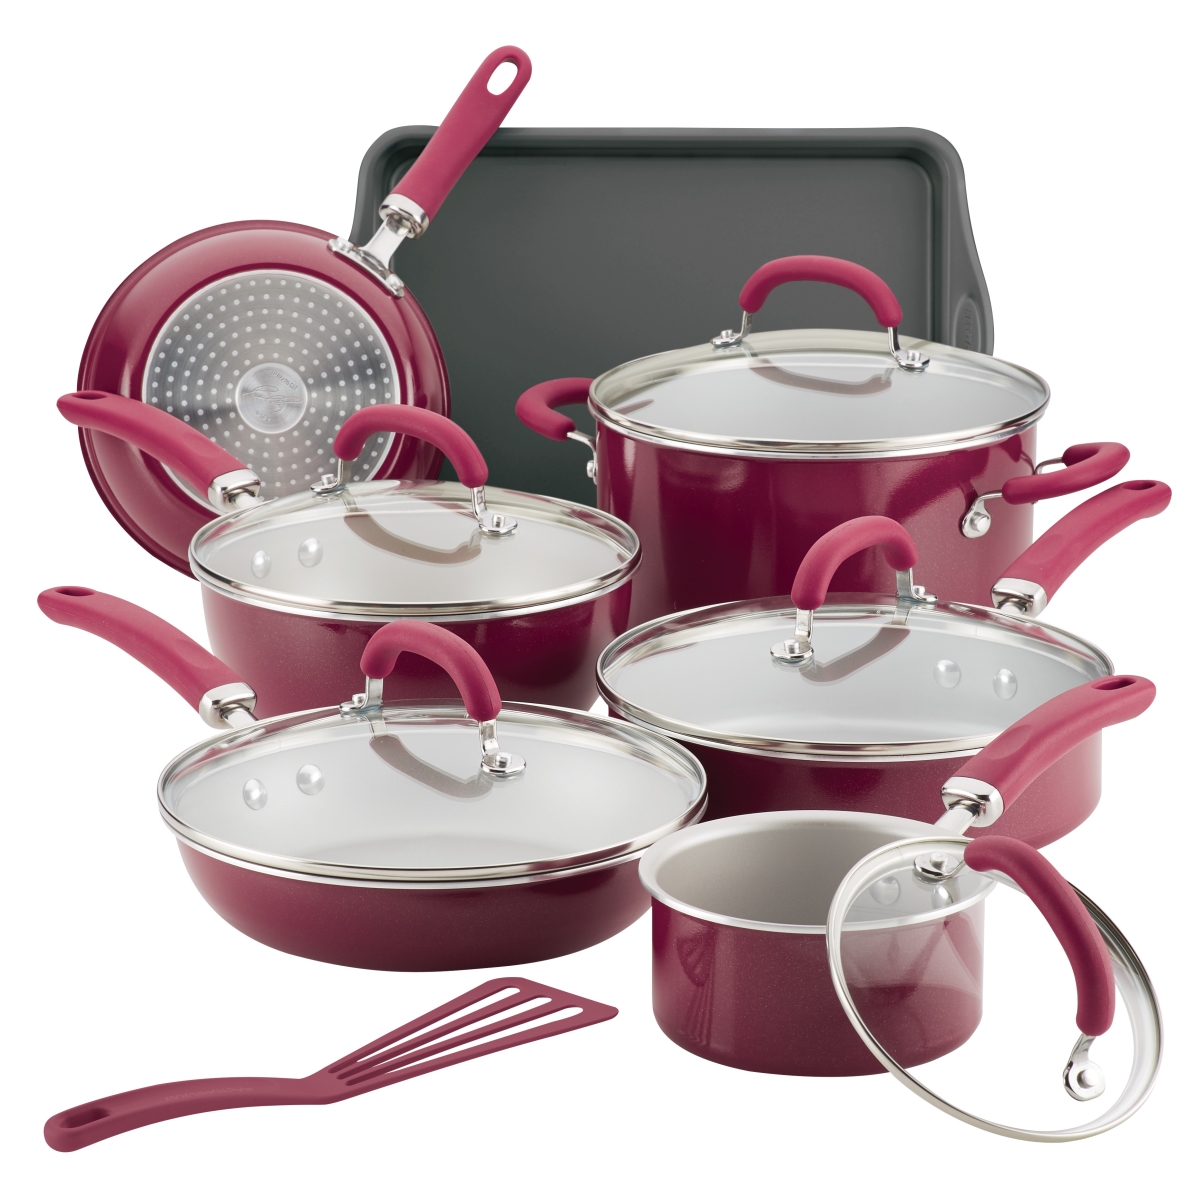 Picture of Rachael Ray 12145 Create Delicious Aluminum Nonstick Cookware Set, 13 Piece - Burgundy Shimmer